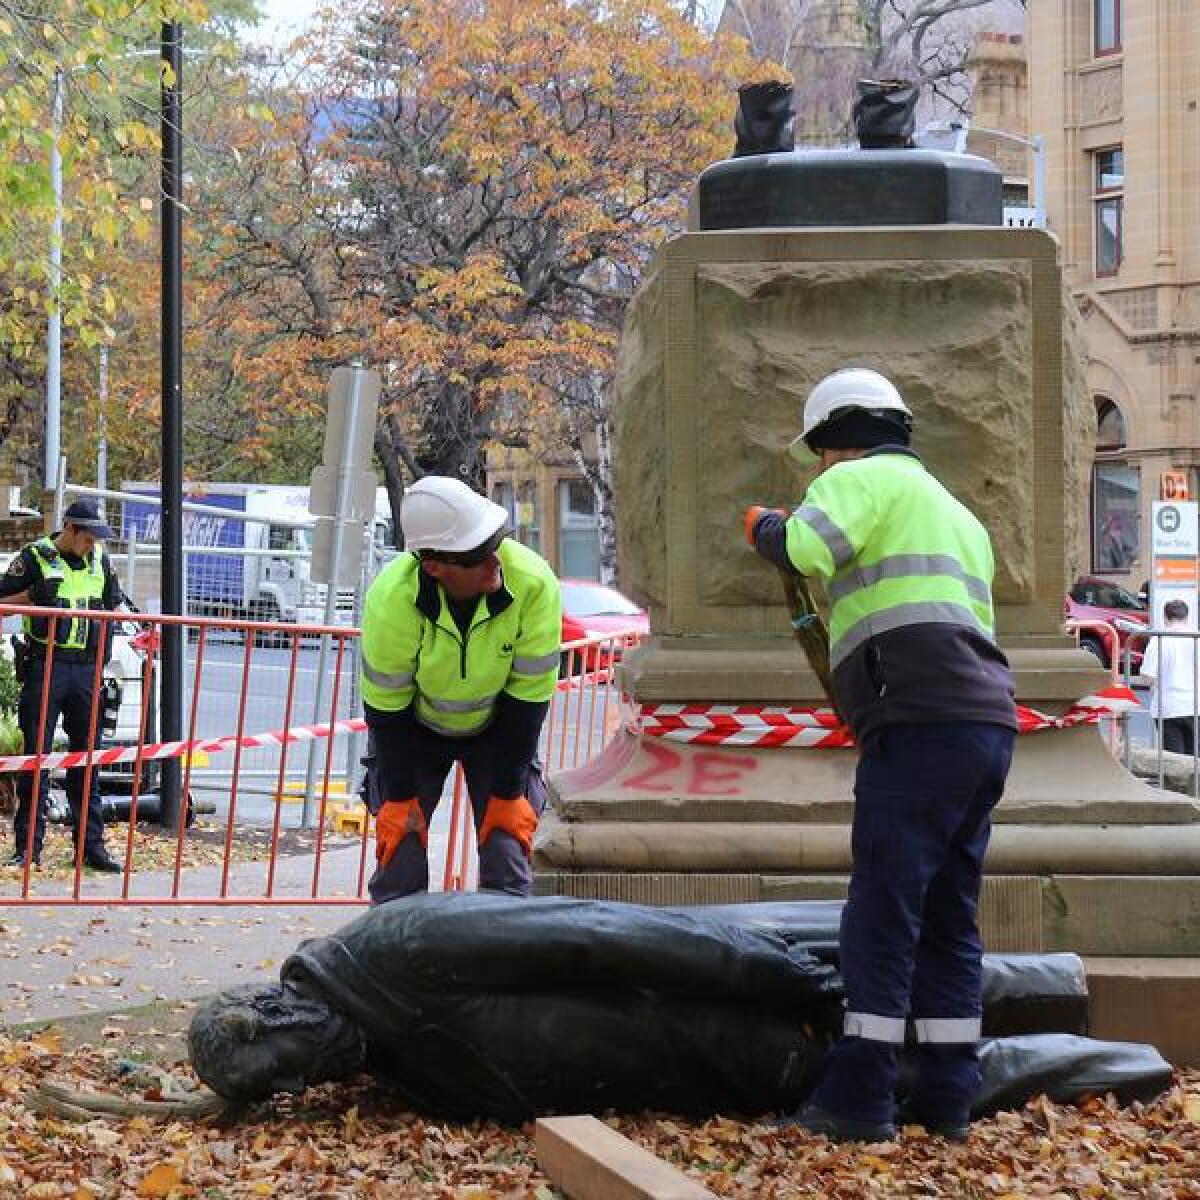 Council workers remove the statue on Wednesday.